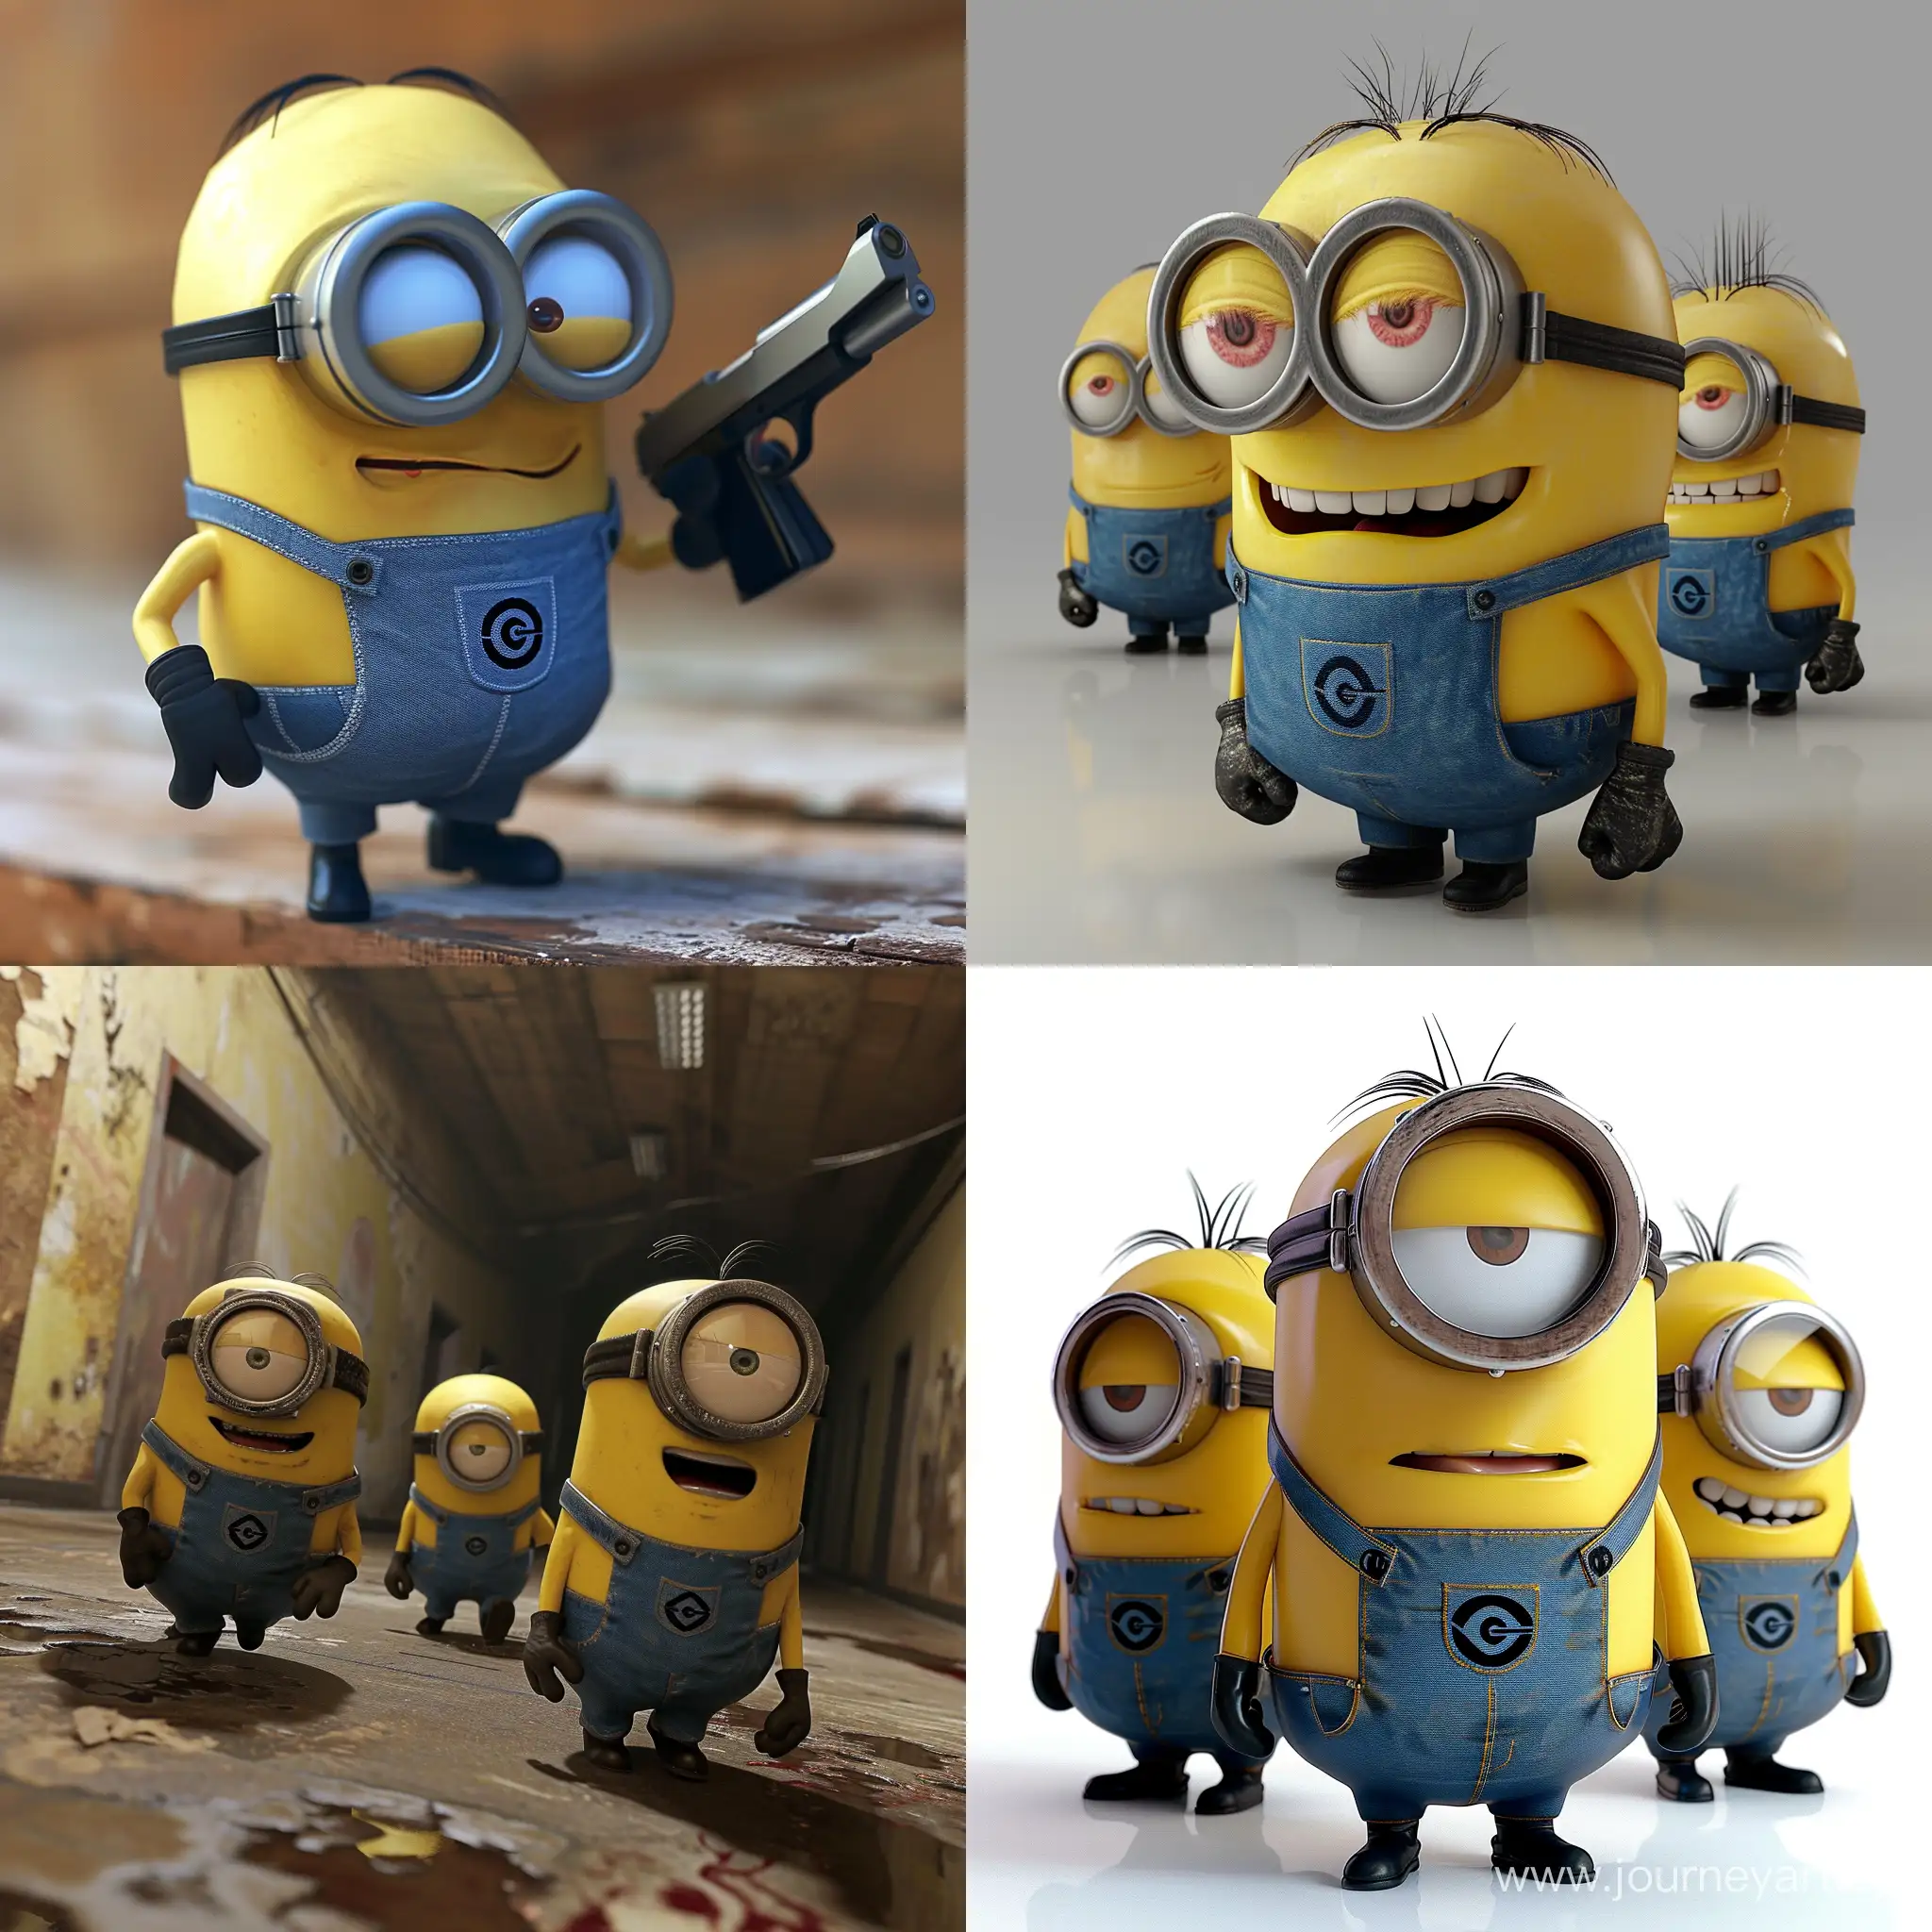 please generate Garry's mod with Minions